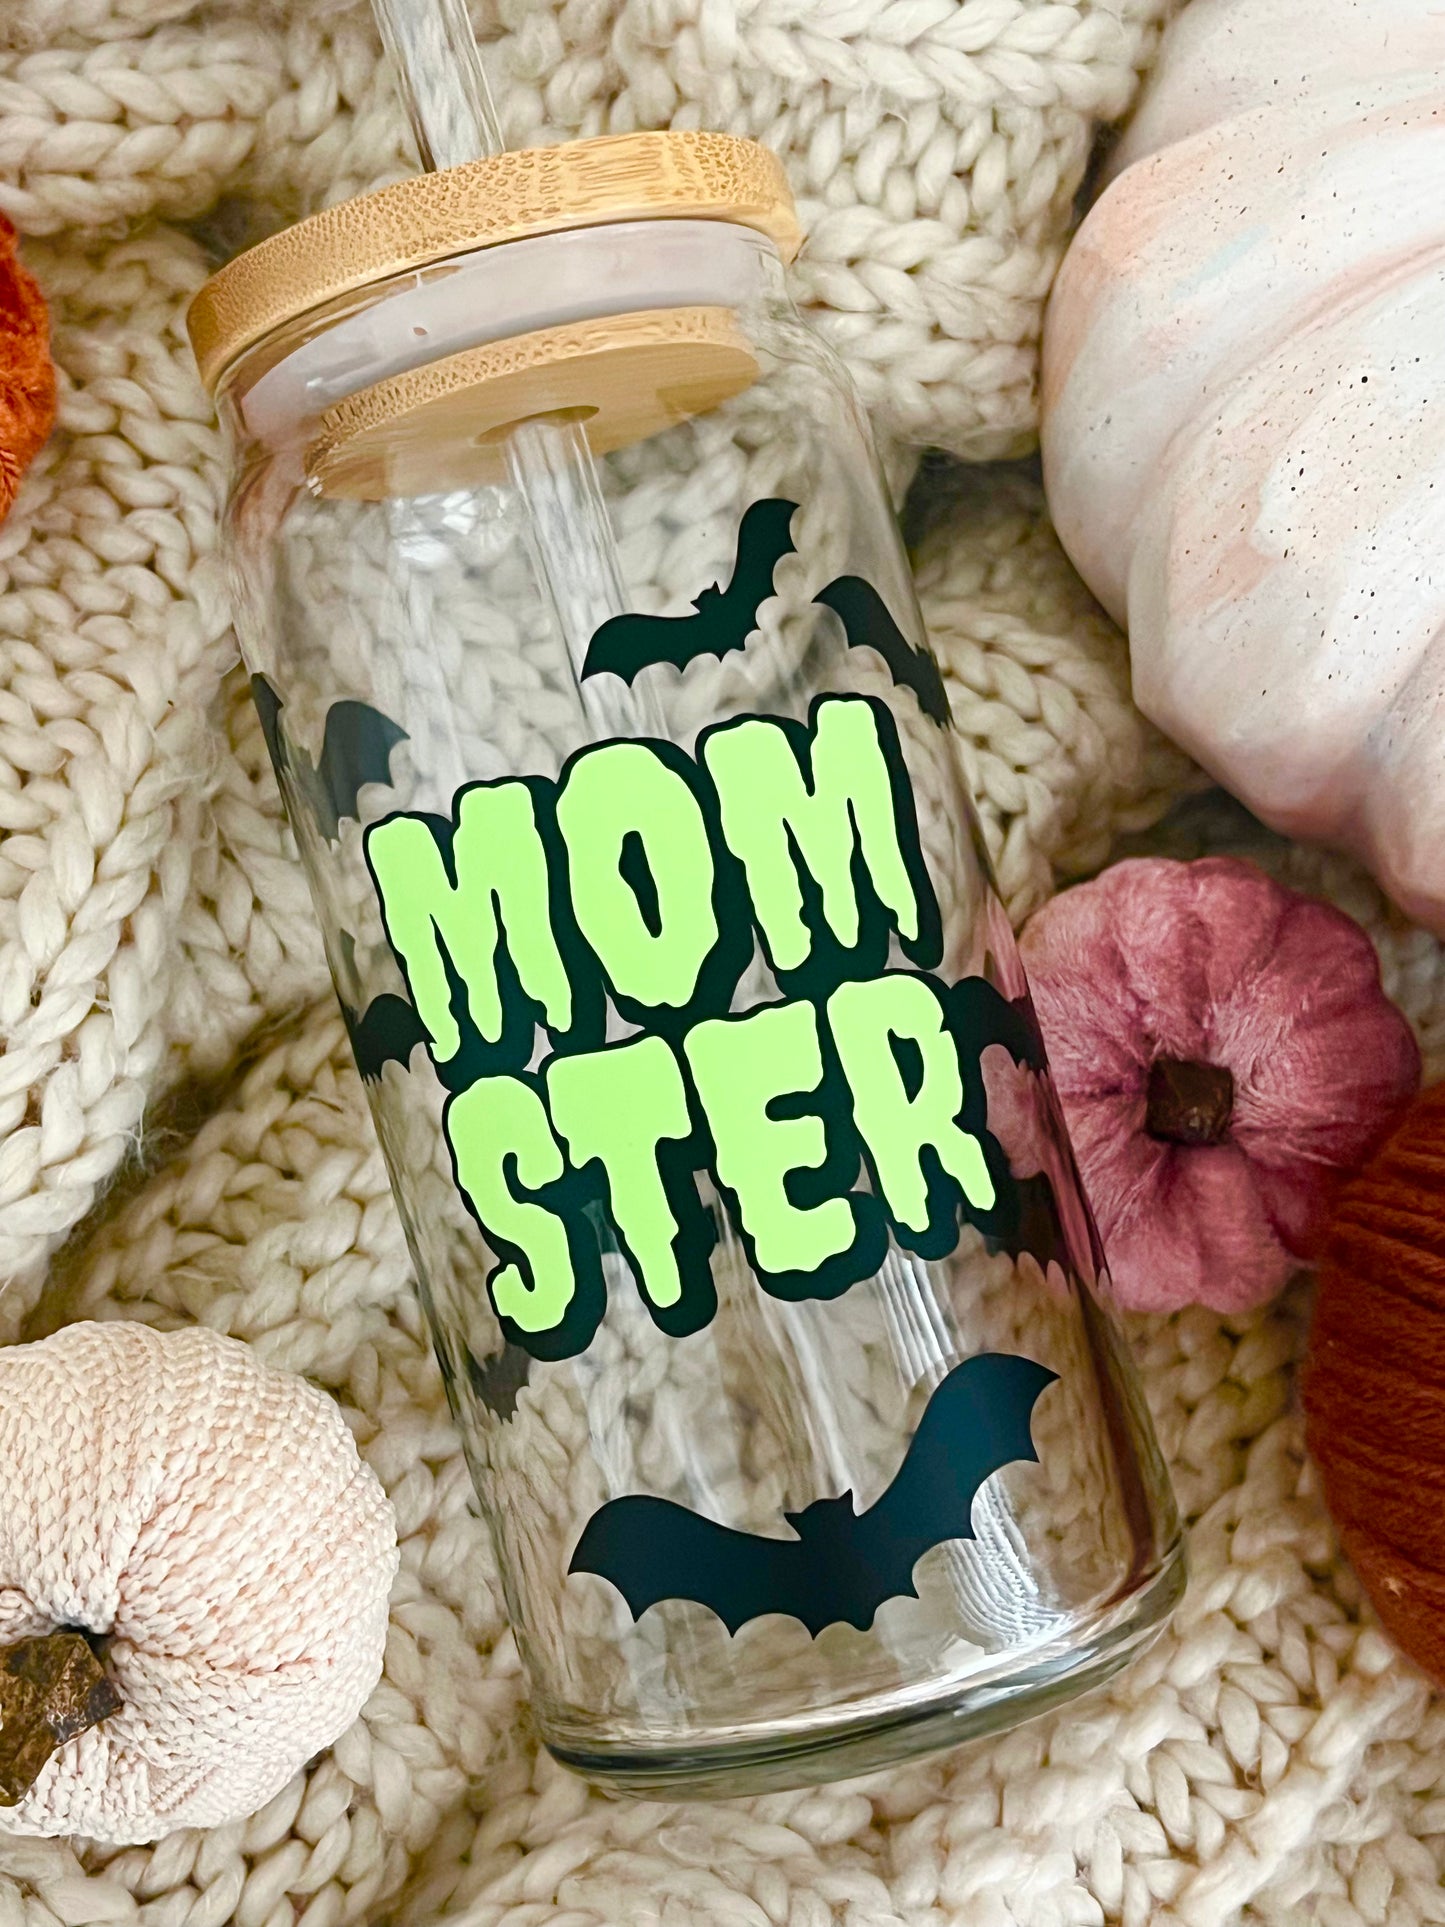 Momster Glow-in-the-Dark Beer Can Glass